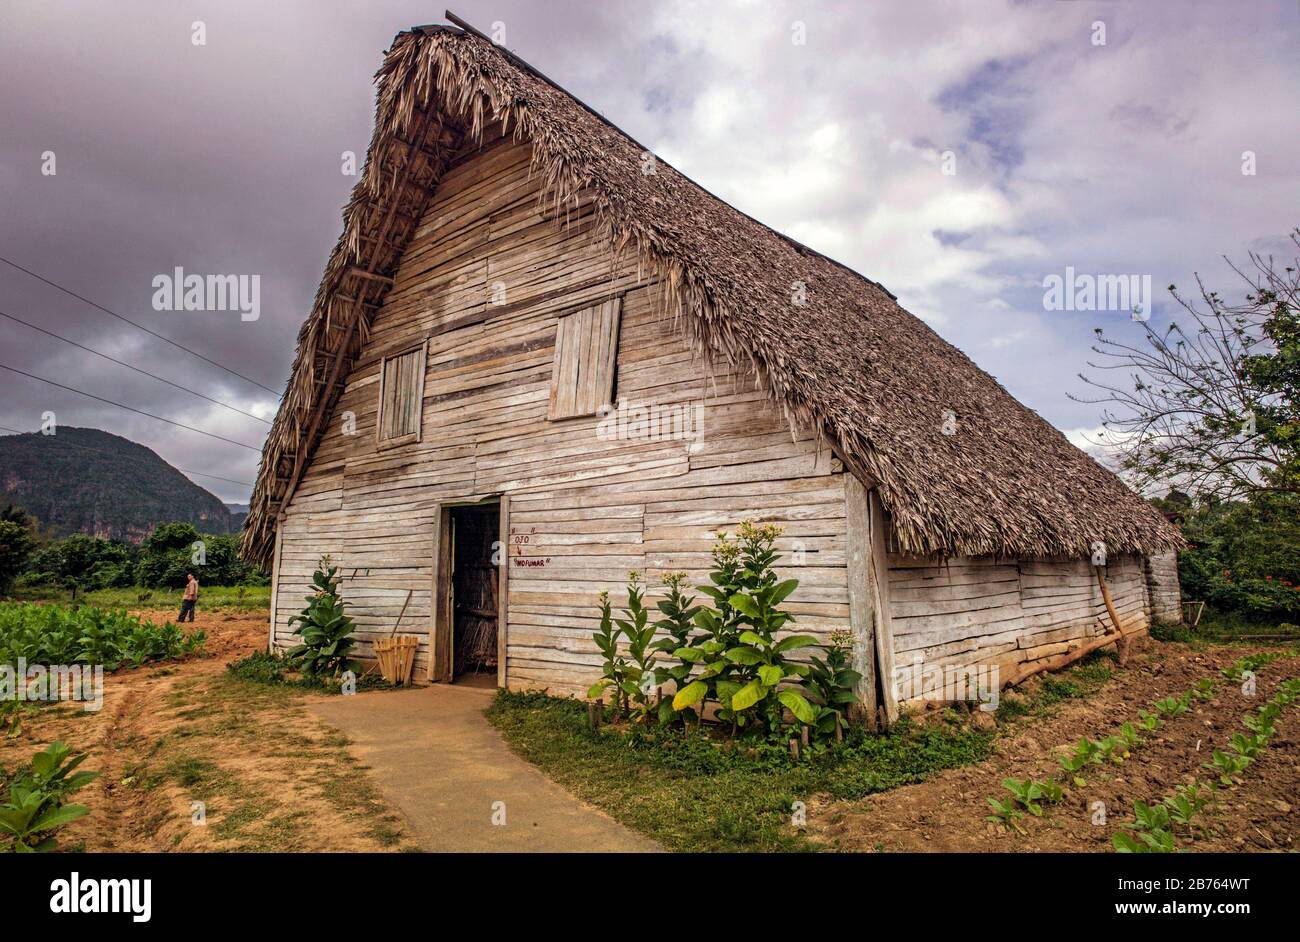 Cuba, Viñales, 15.02.2016. Tobacco growing in Viñales on 15.02.2016. The Pinar del Rio region is the best area for growing tobacco. Drying sheds ensure that the leaves dry evenly. [automated translation] Stock Photo